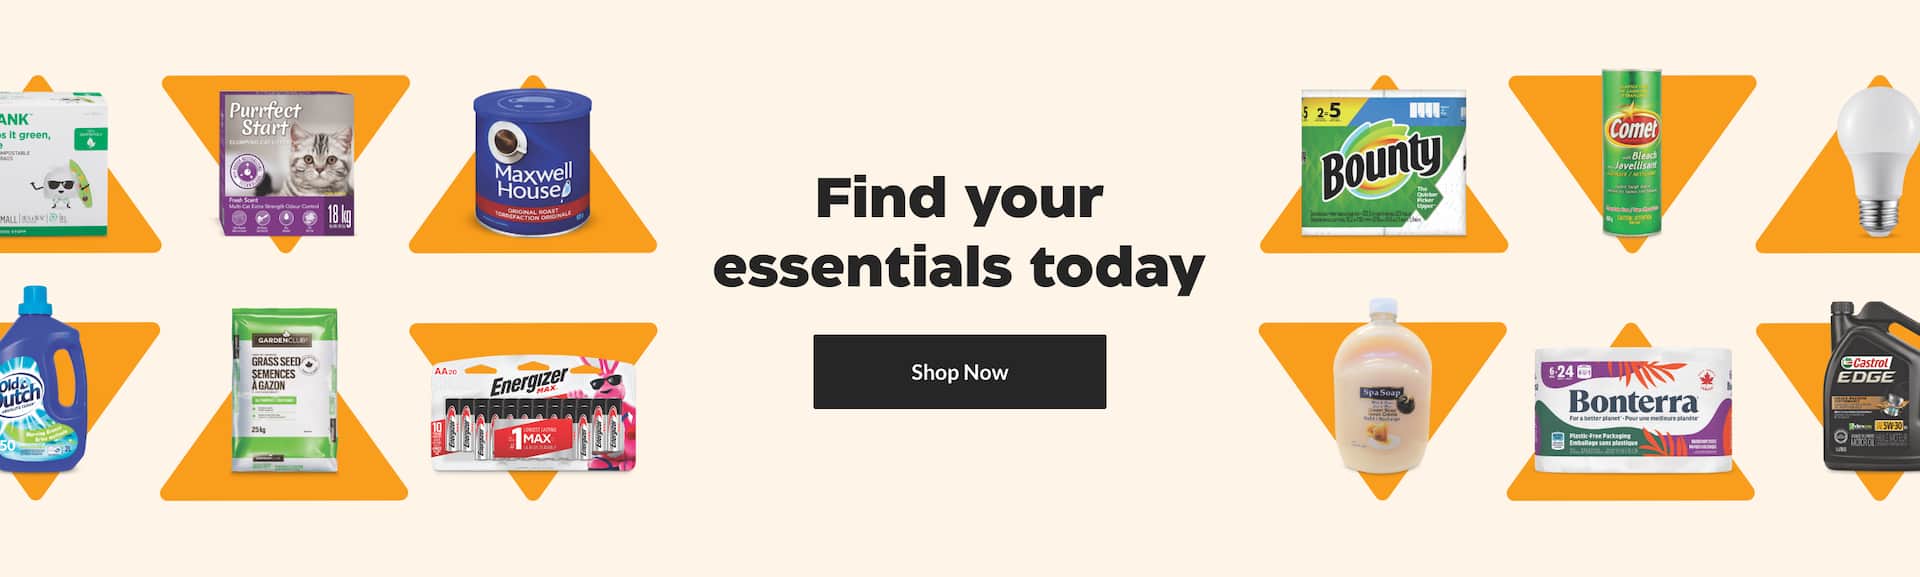 Various household products including Energizer batteries, Comet cleaner and more around a “Get your essentials today” title.